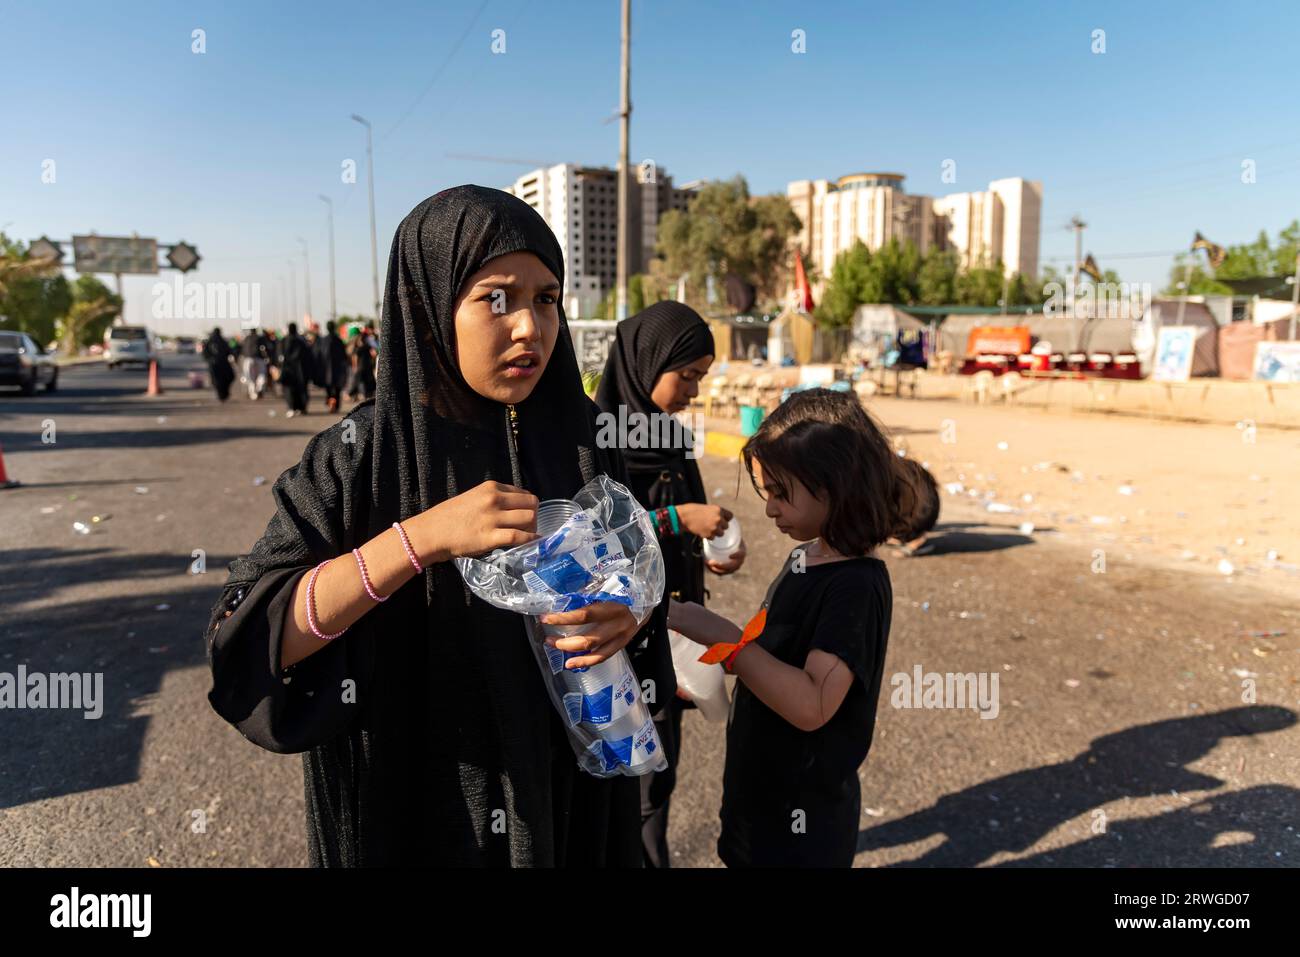 An Iraqi Shia girl distribute juice among Shia Muslim pilgrims marching from Najaf towards Shrine city of Karbala. Every year, millions of Shia Muslims and some from other faiths undertake a 20-day pilgrimage on foot from various cities in Iraq and Iran to the holy city of Karbala. This pilgrimage is in remembrance of Imam Hussein, the grandson of the Prophet Muhammad, who died in a battle in 680 AD. On the 40th day of mourning for Hussein, known as Arbaeen, pilgrims converge in Karbala to pay tribute at his shrine. Along the way, volunteers provide food, water, and shelter, and villagers open Stock Photo